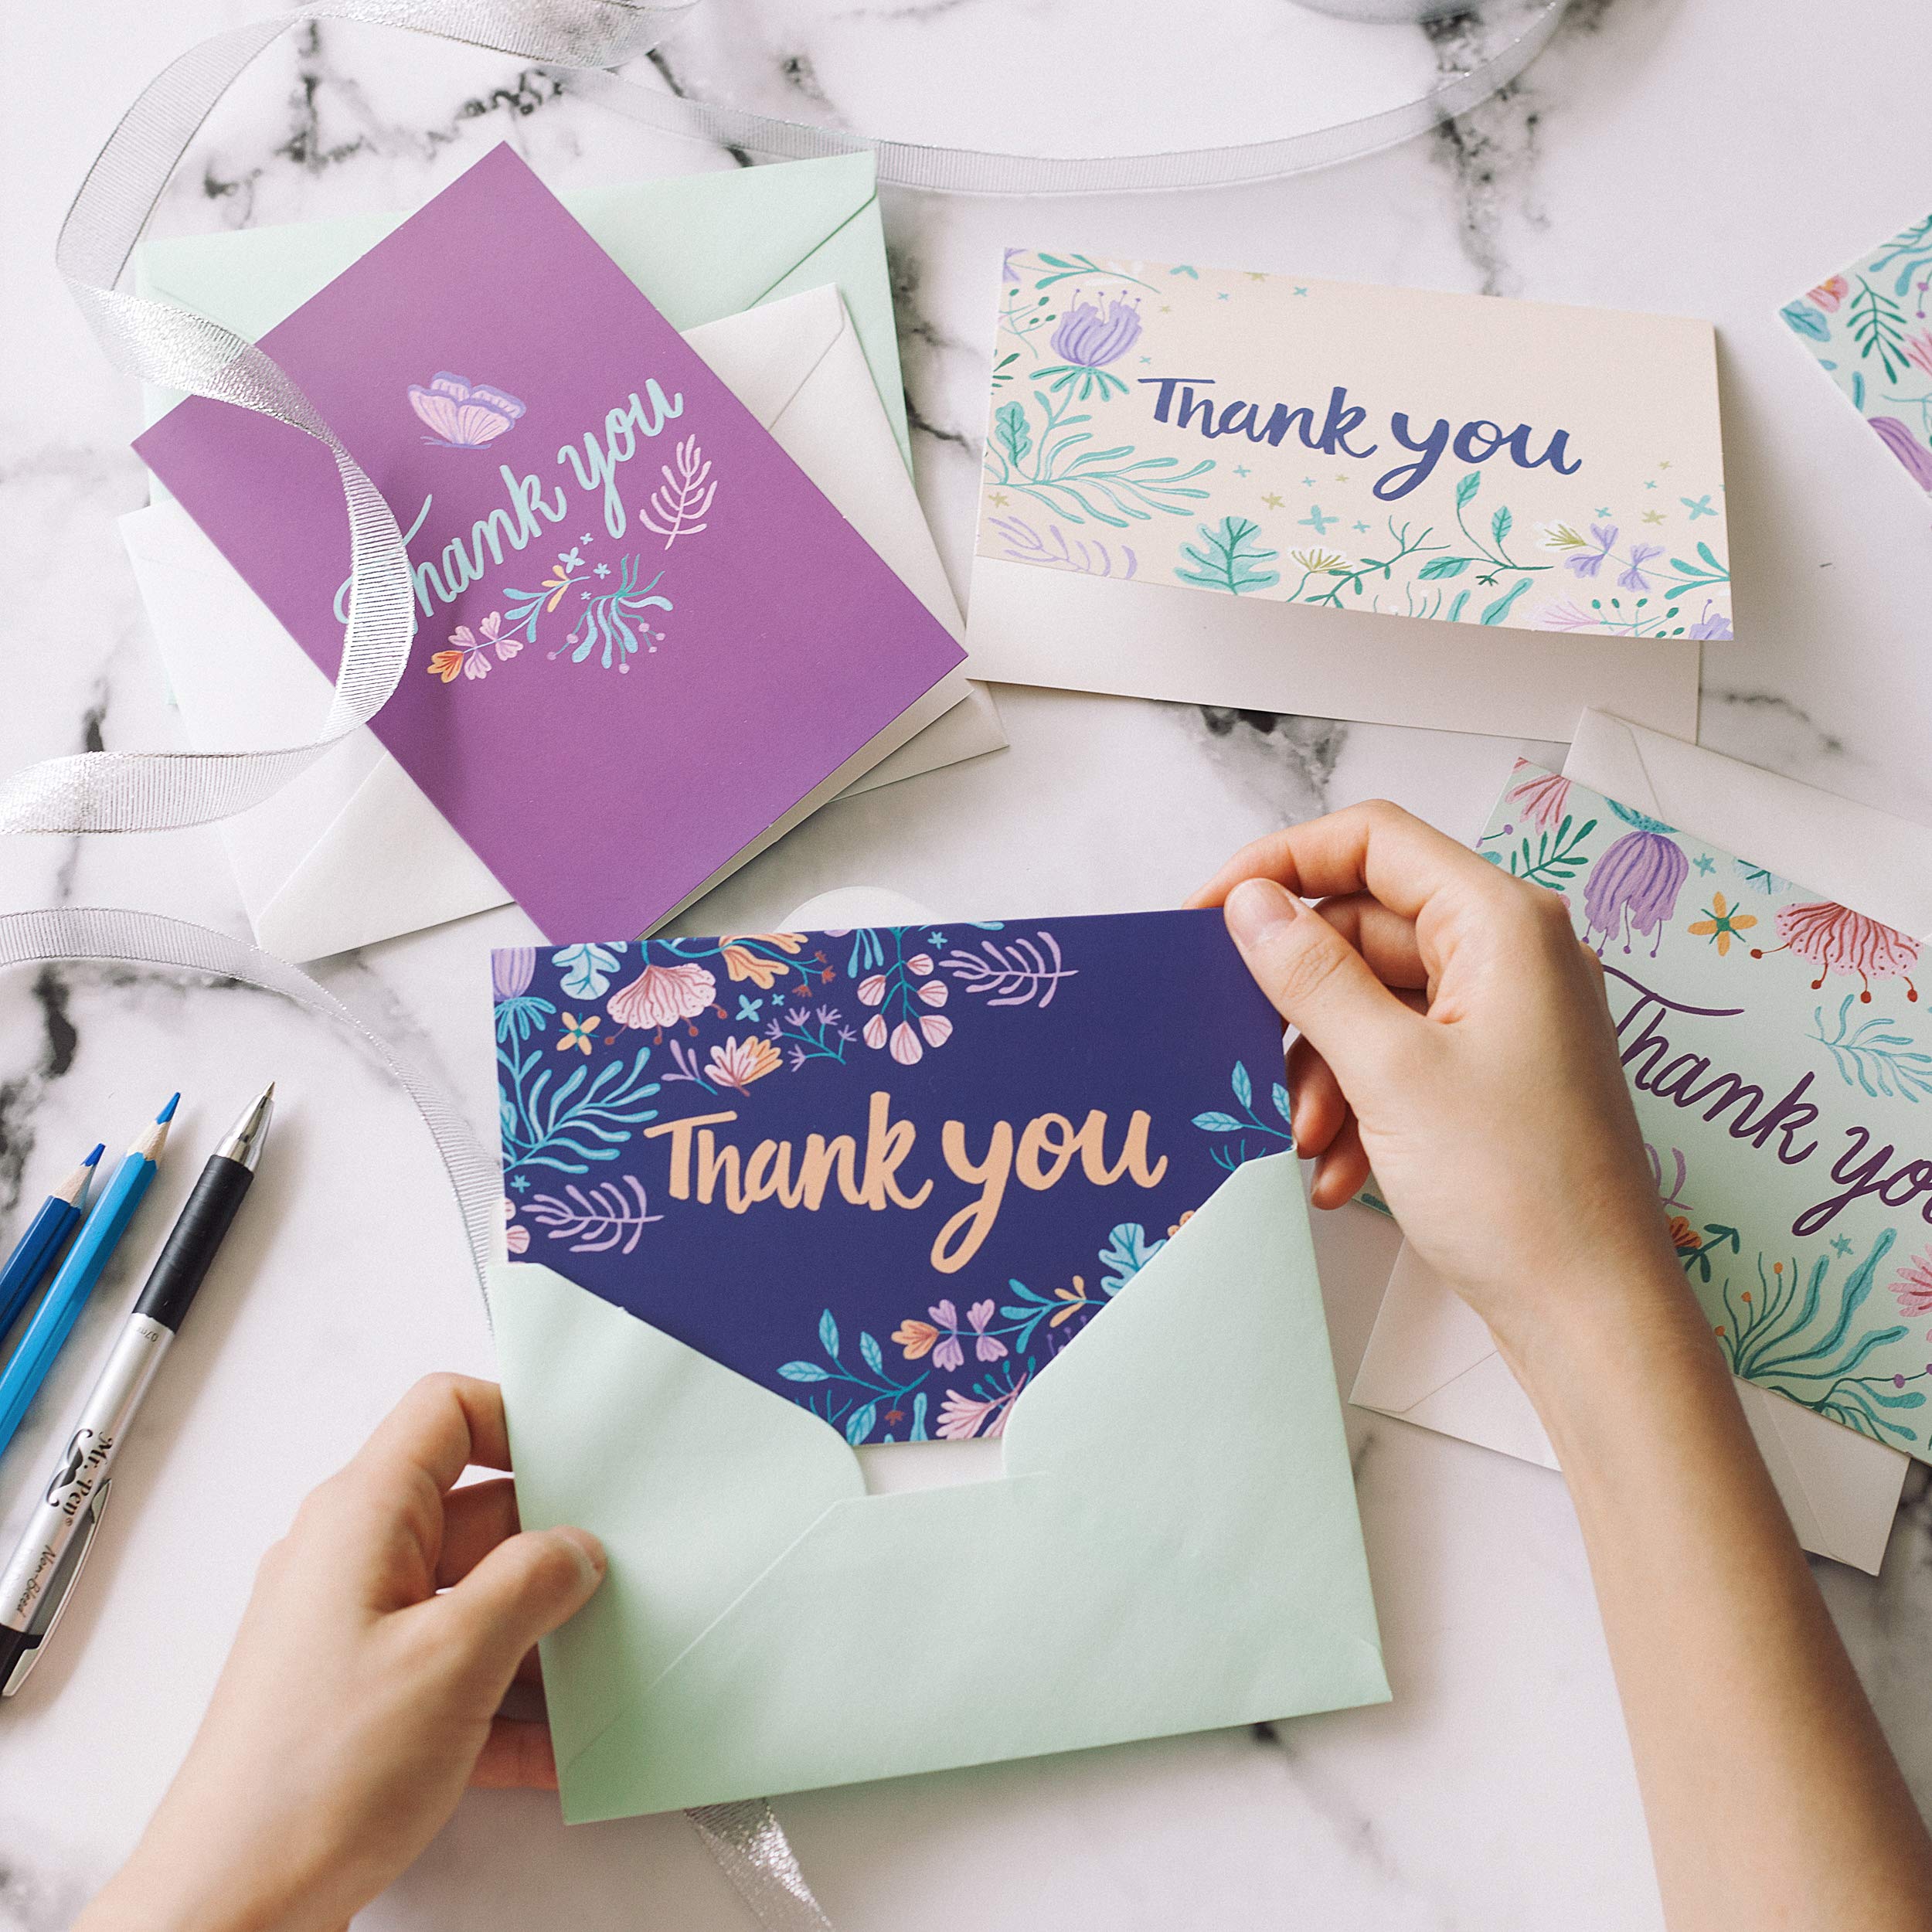 Mr. Pen- Thank You Cards, 20 Pack, Thank You Cards with Envelopes, Blank Thank You Cards, Assorted Cards, Thank You Notes Cards, Thank You Cards Pack, Thank You Card, Thank You Note Blank Inside